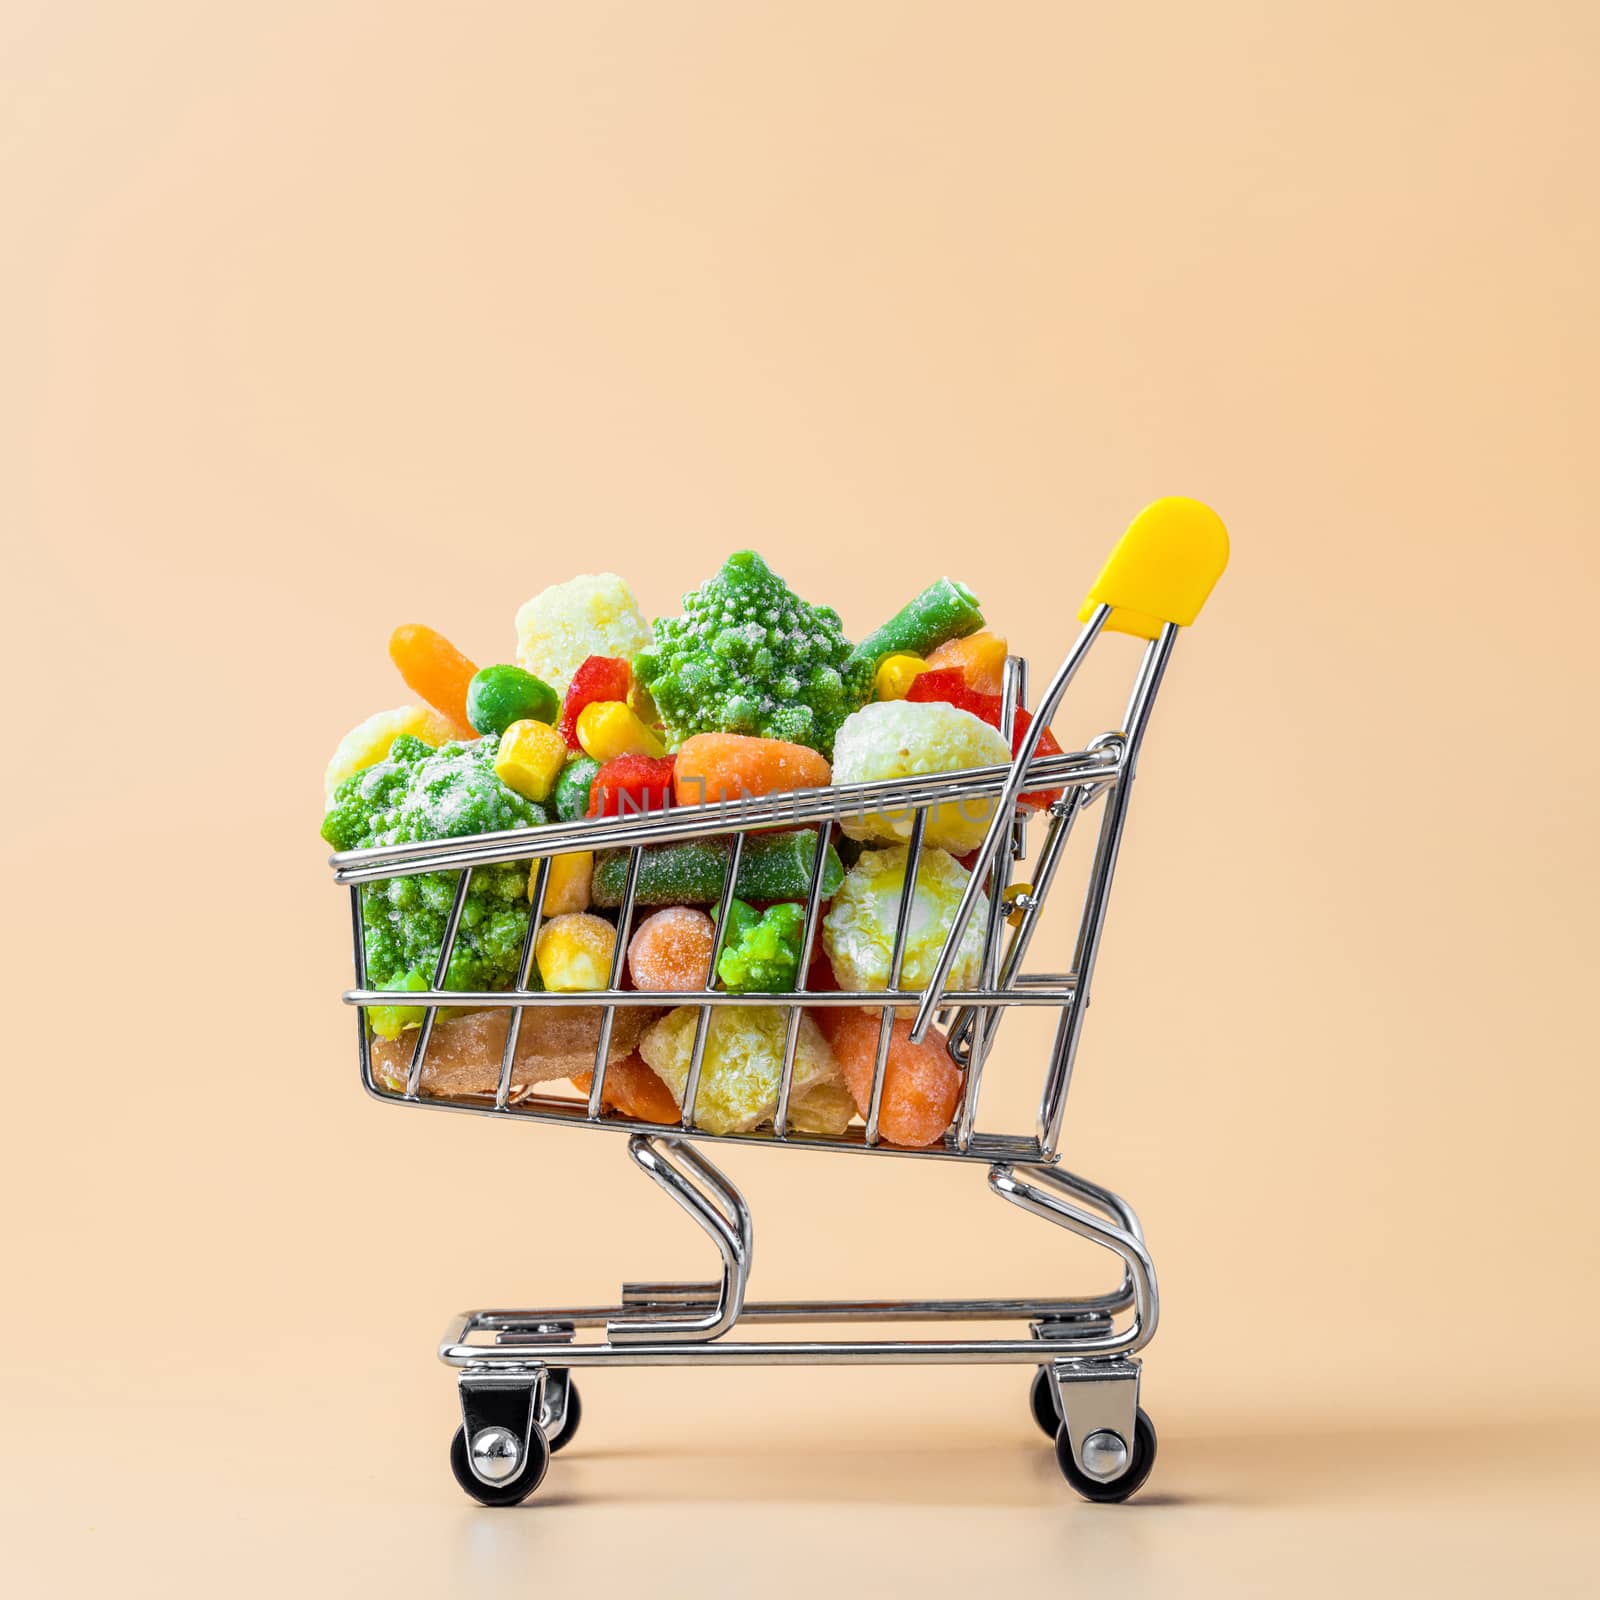 Frozen vegetables assorted in toy shopping cart on cream background. Full of assorted frozen vegetables food shop trolley at beige or yellow backdrop. Minimalistic concept.